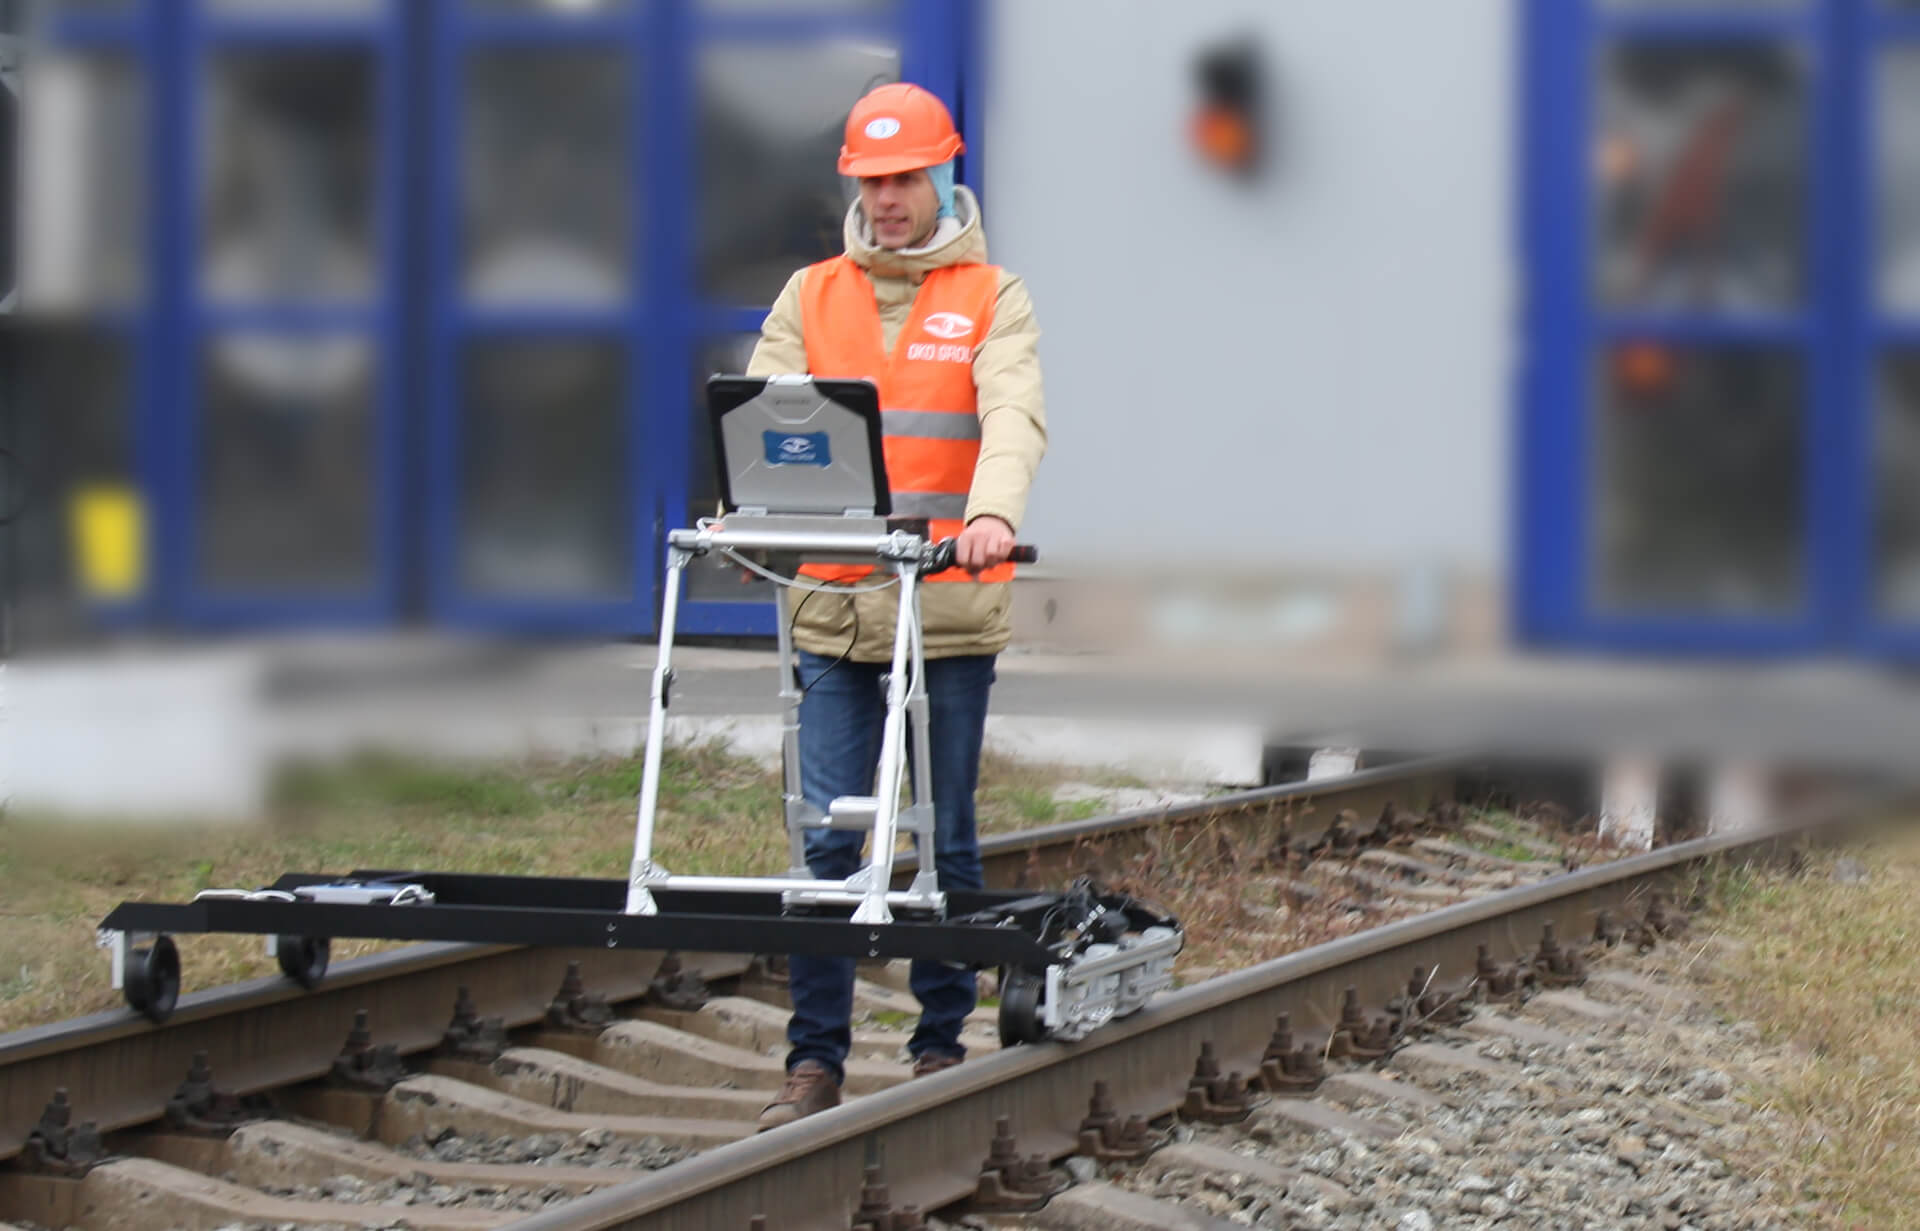 ETS2-77 eddy current flaw detector application on the railroad track